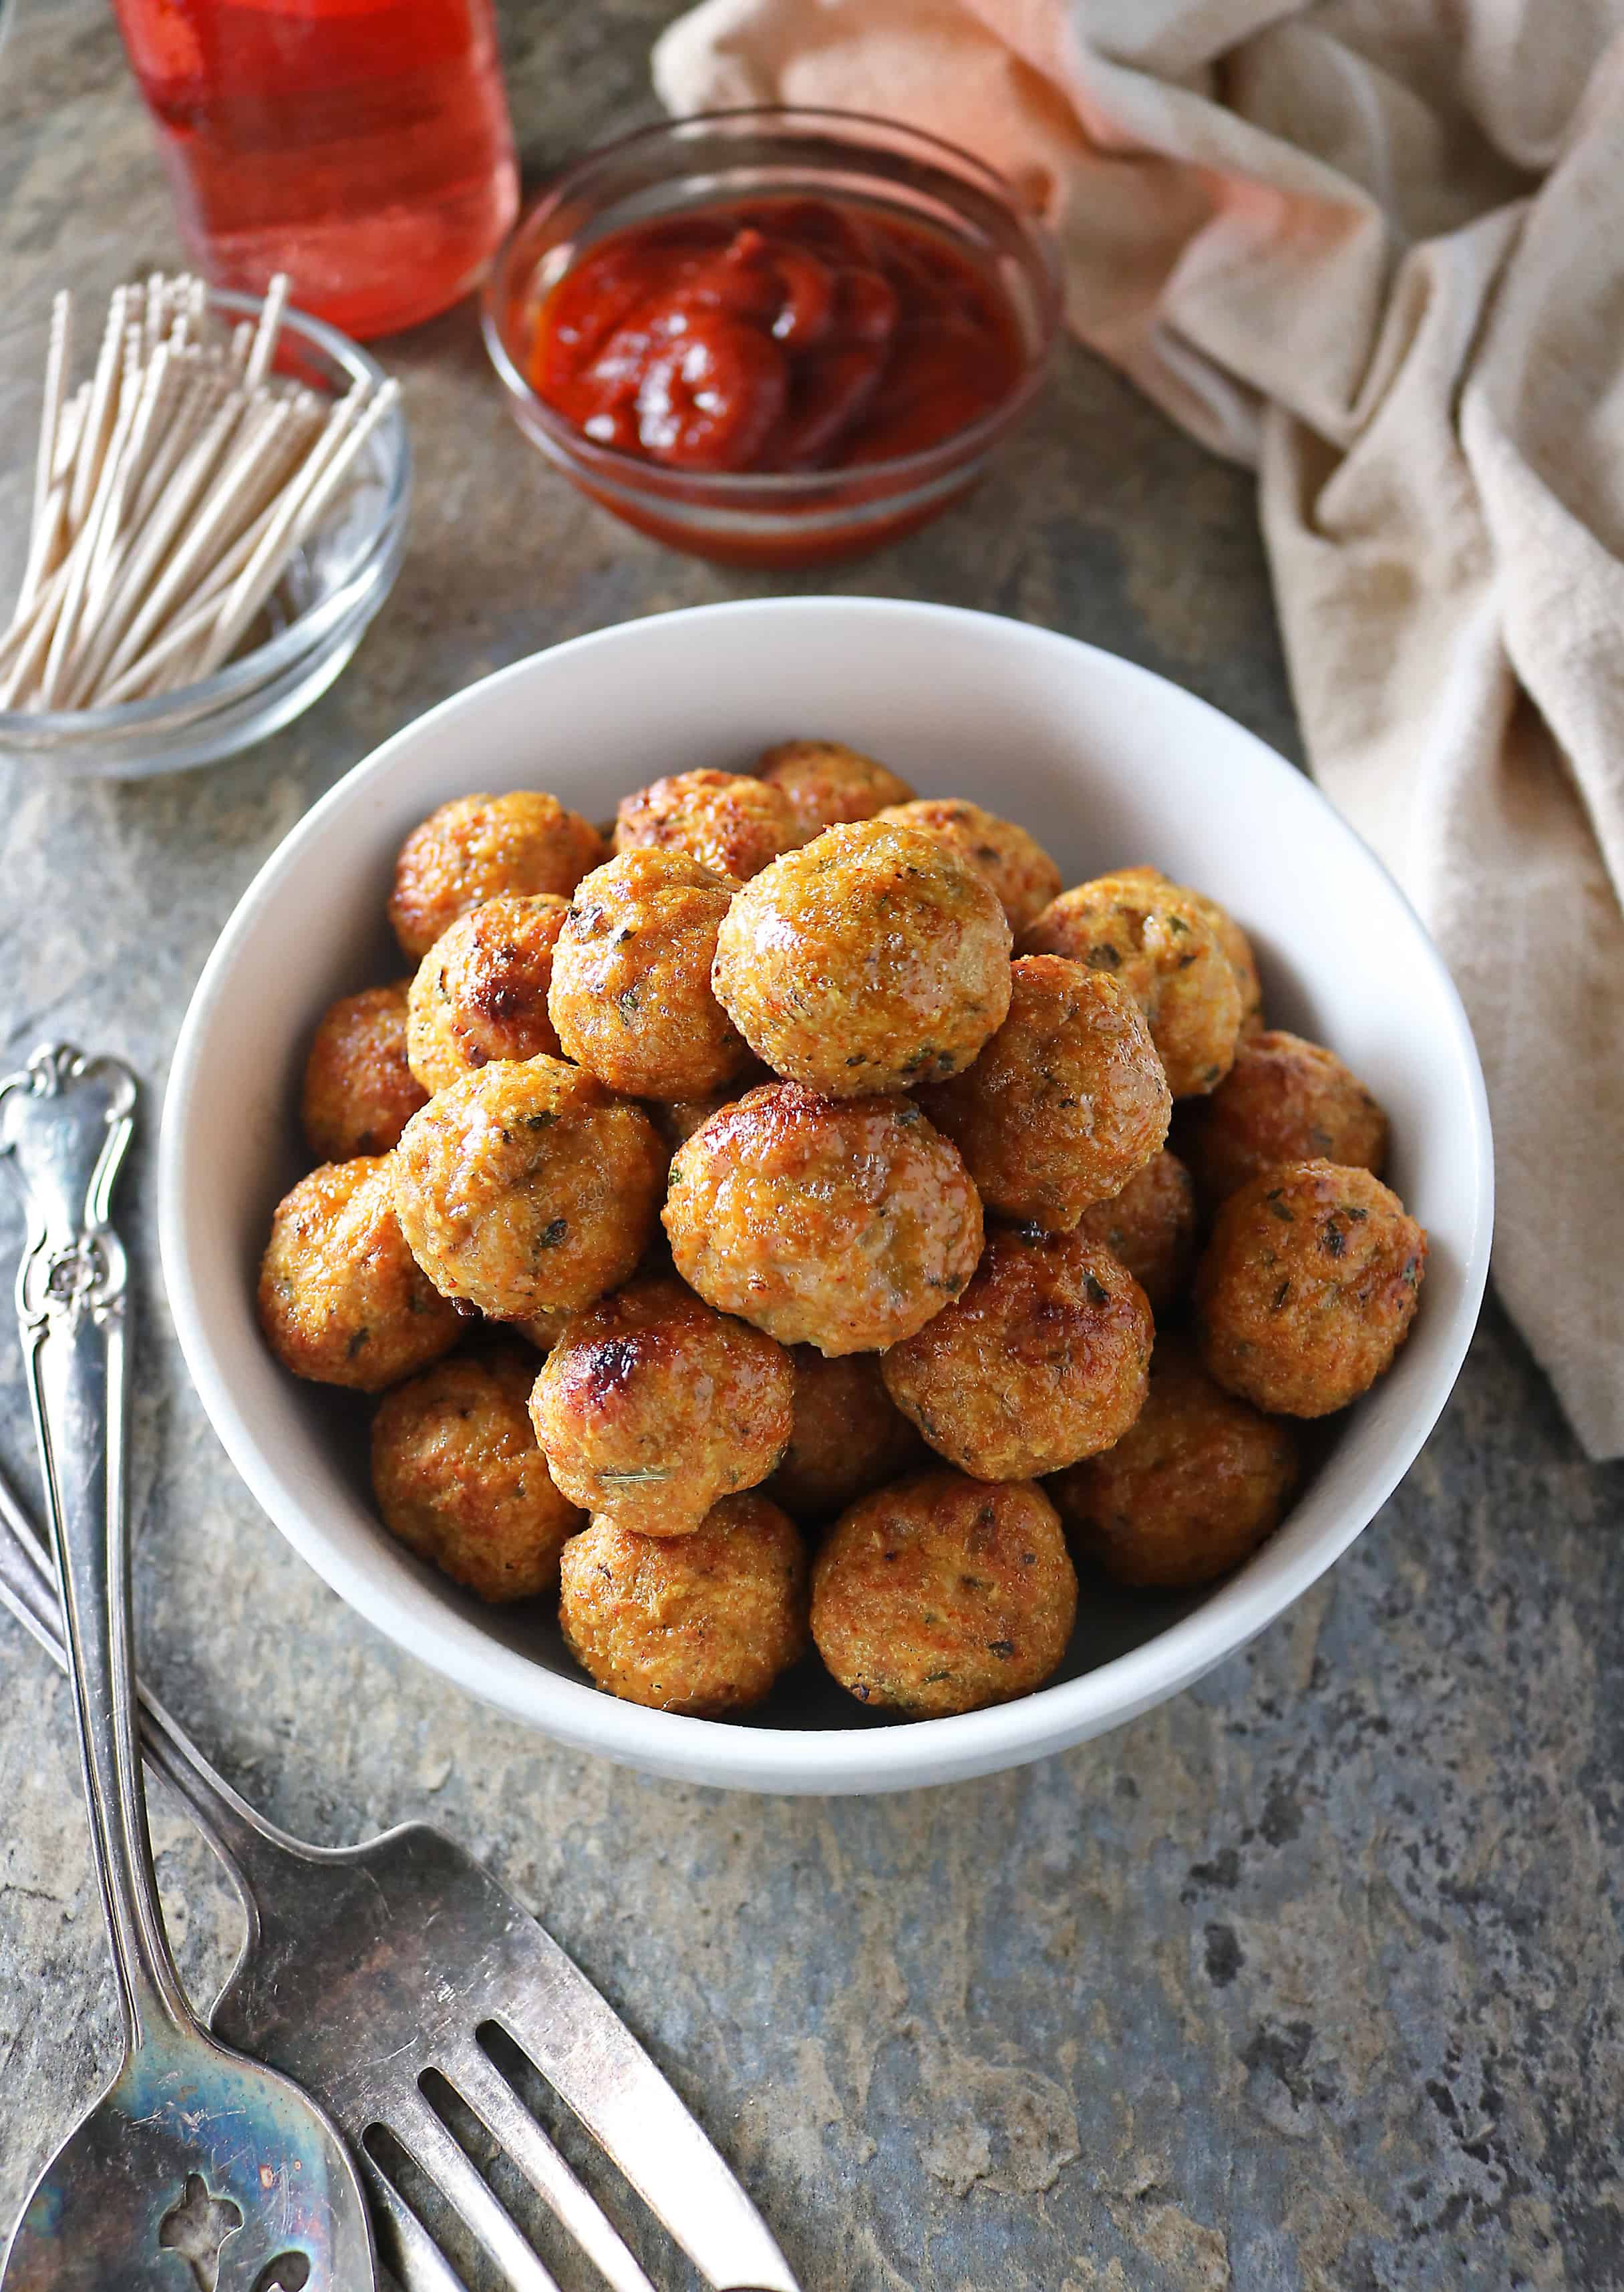 Image of Gluten-free, Baked, Spicy Chicken Meatballs are so easy to make and are delicious dipped in your favorite sauce or dropped into a curry.